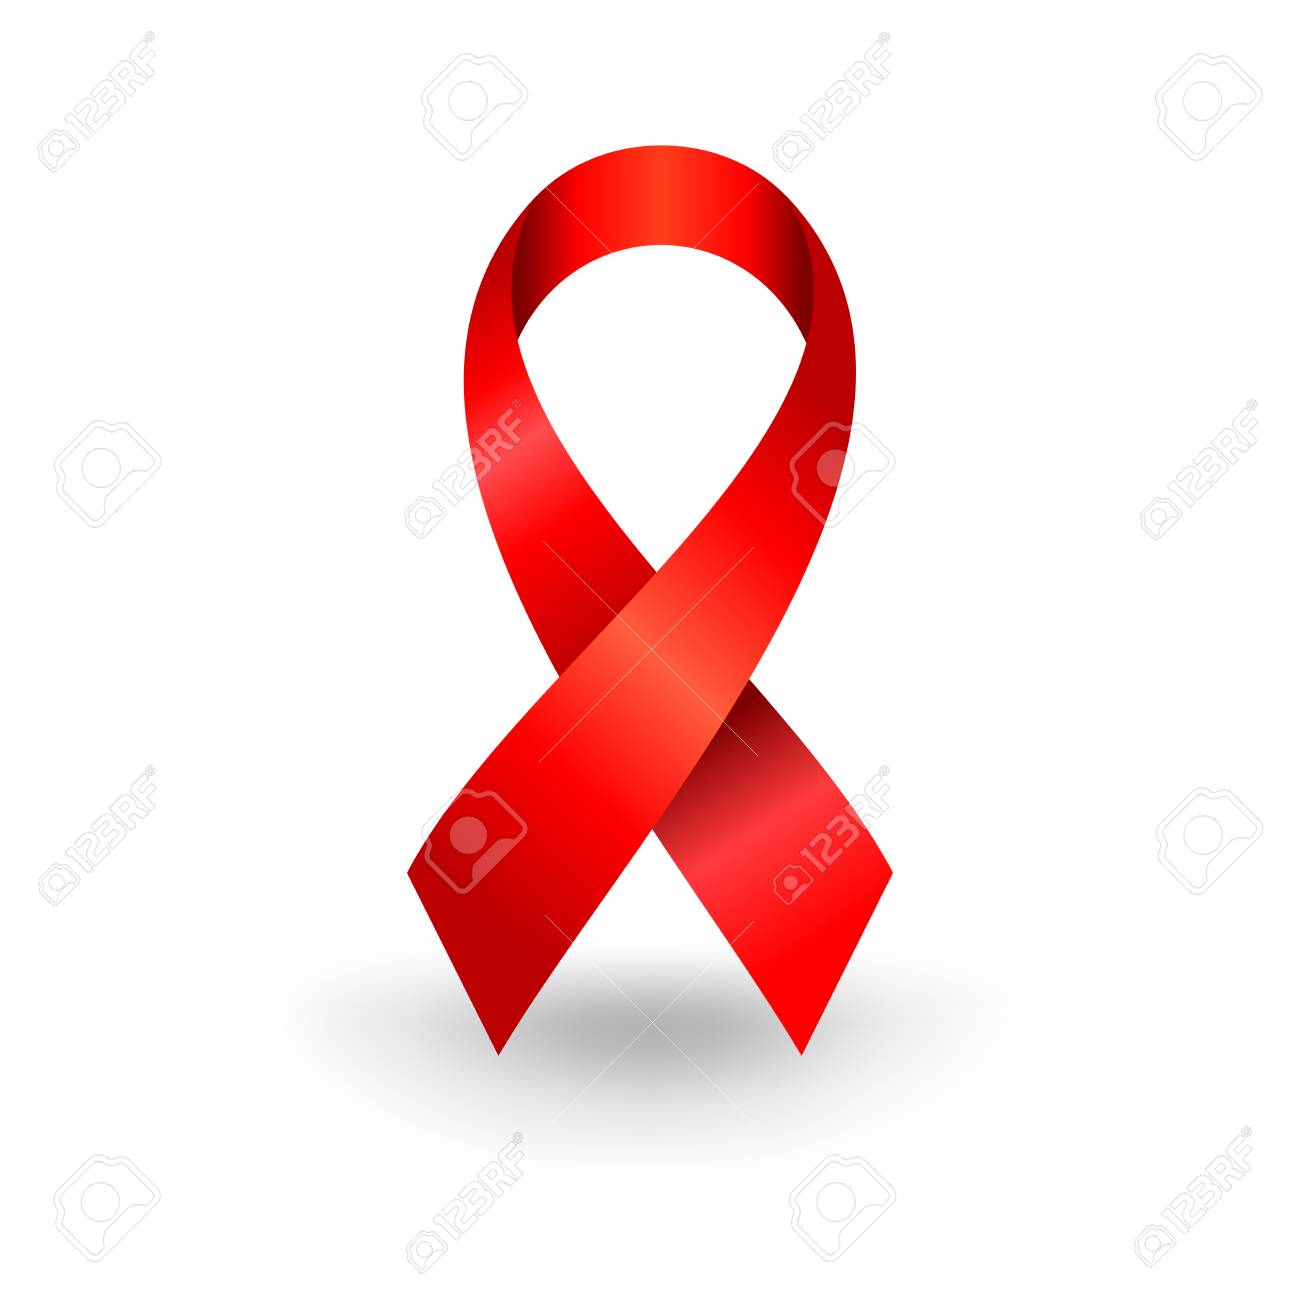 hiv aids red